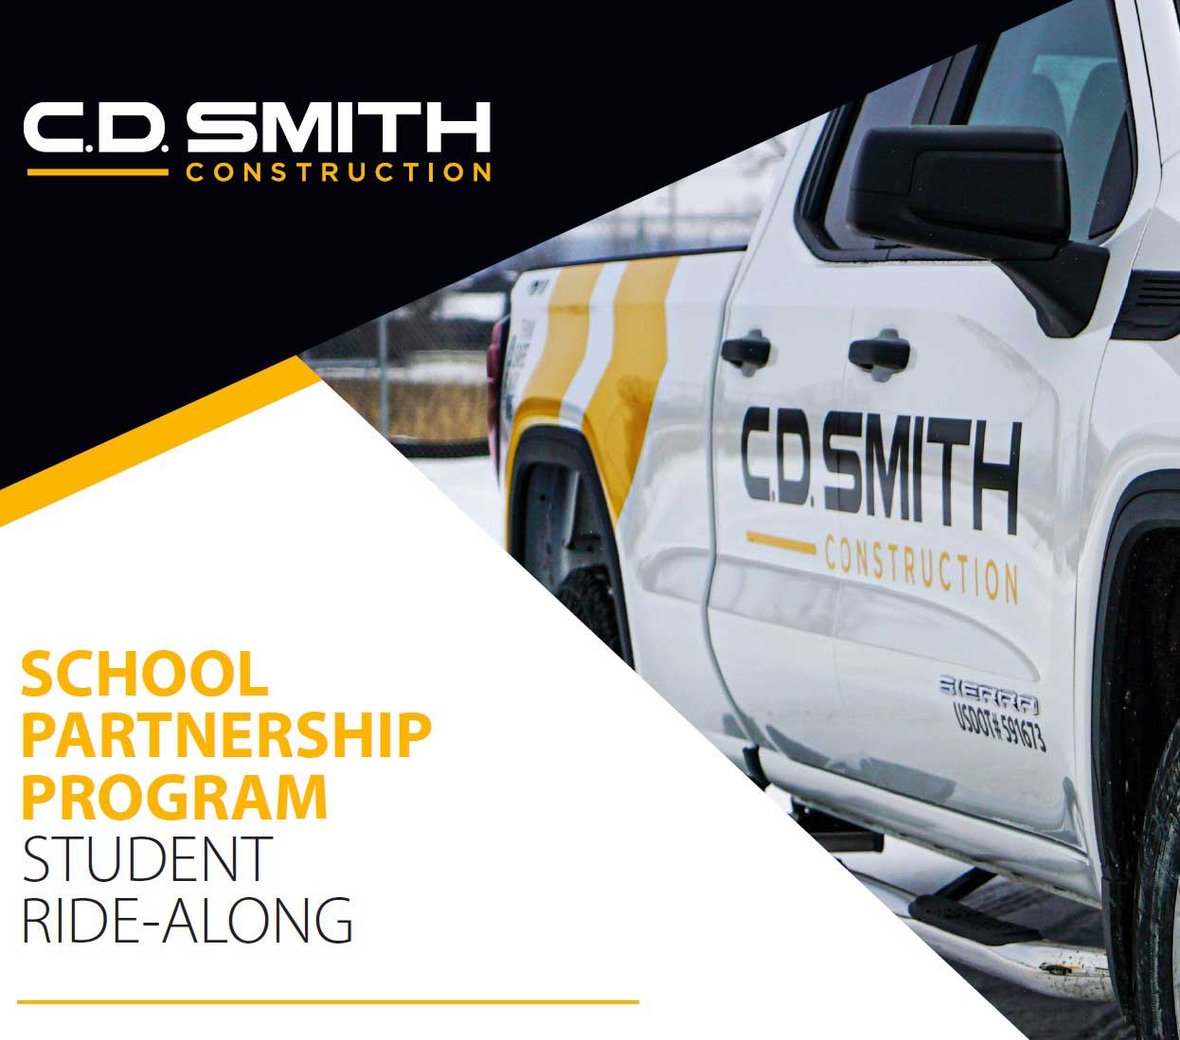 C.D. Smith Construction branded fleet vehicle for ride-alongs